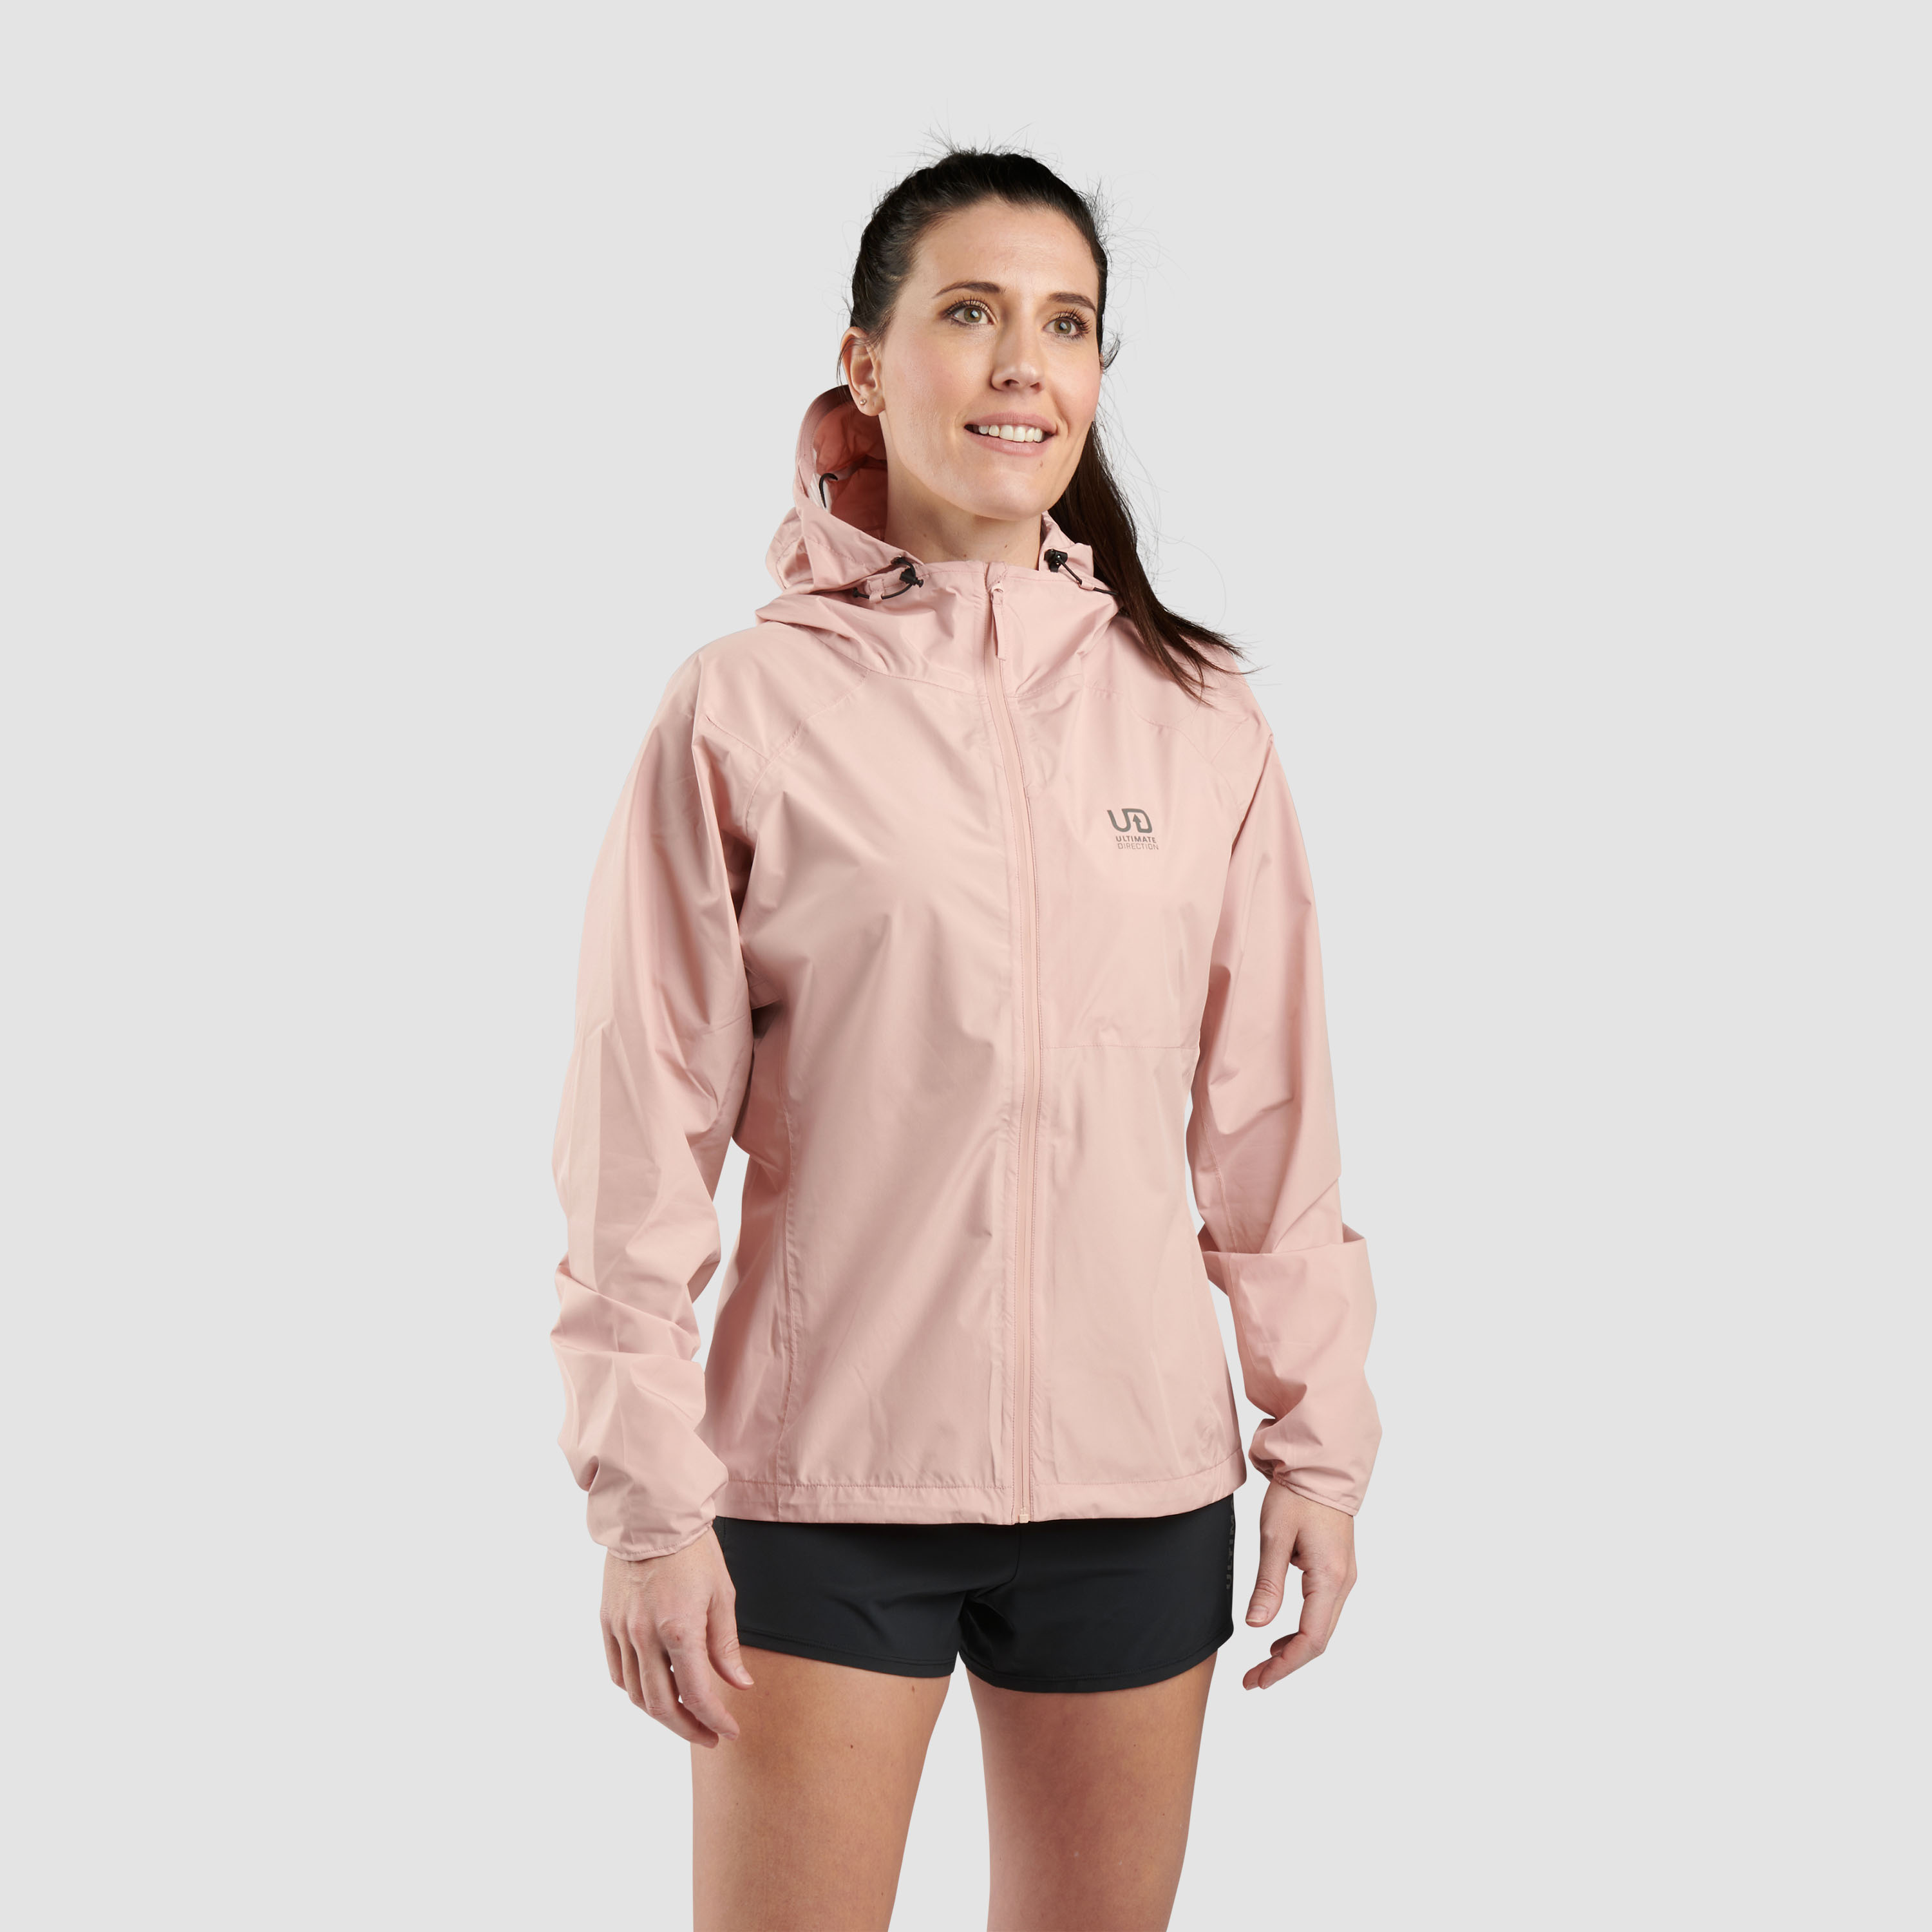 Ultimate Direction Women's Deluge Jacket in Clay Size Small